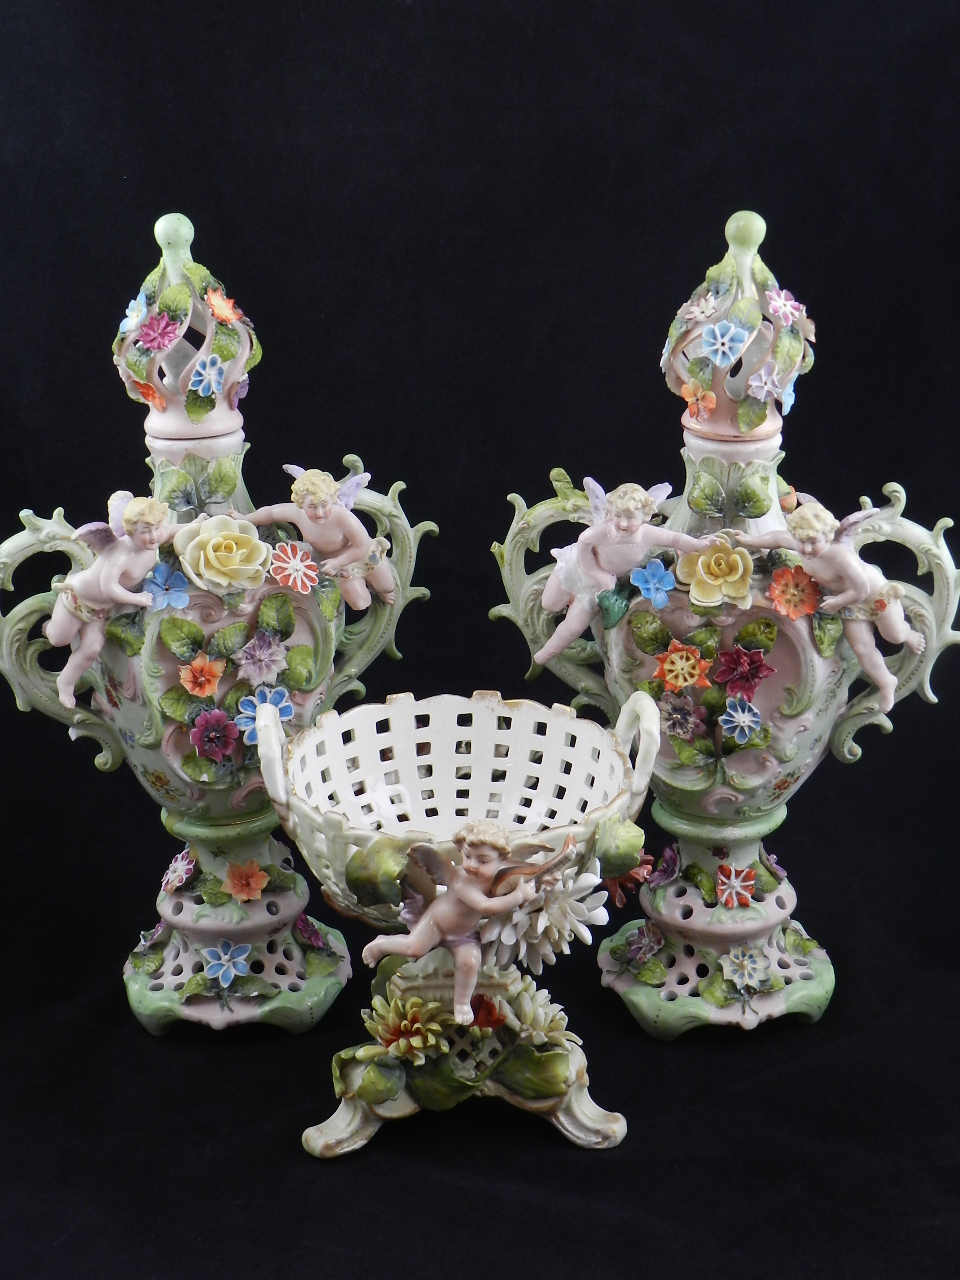 A pair of 19th century porcelain vases with covers, festooned with flowers and putti, together